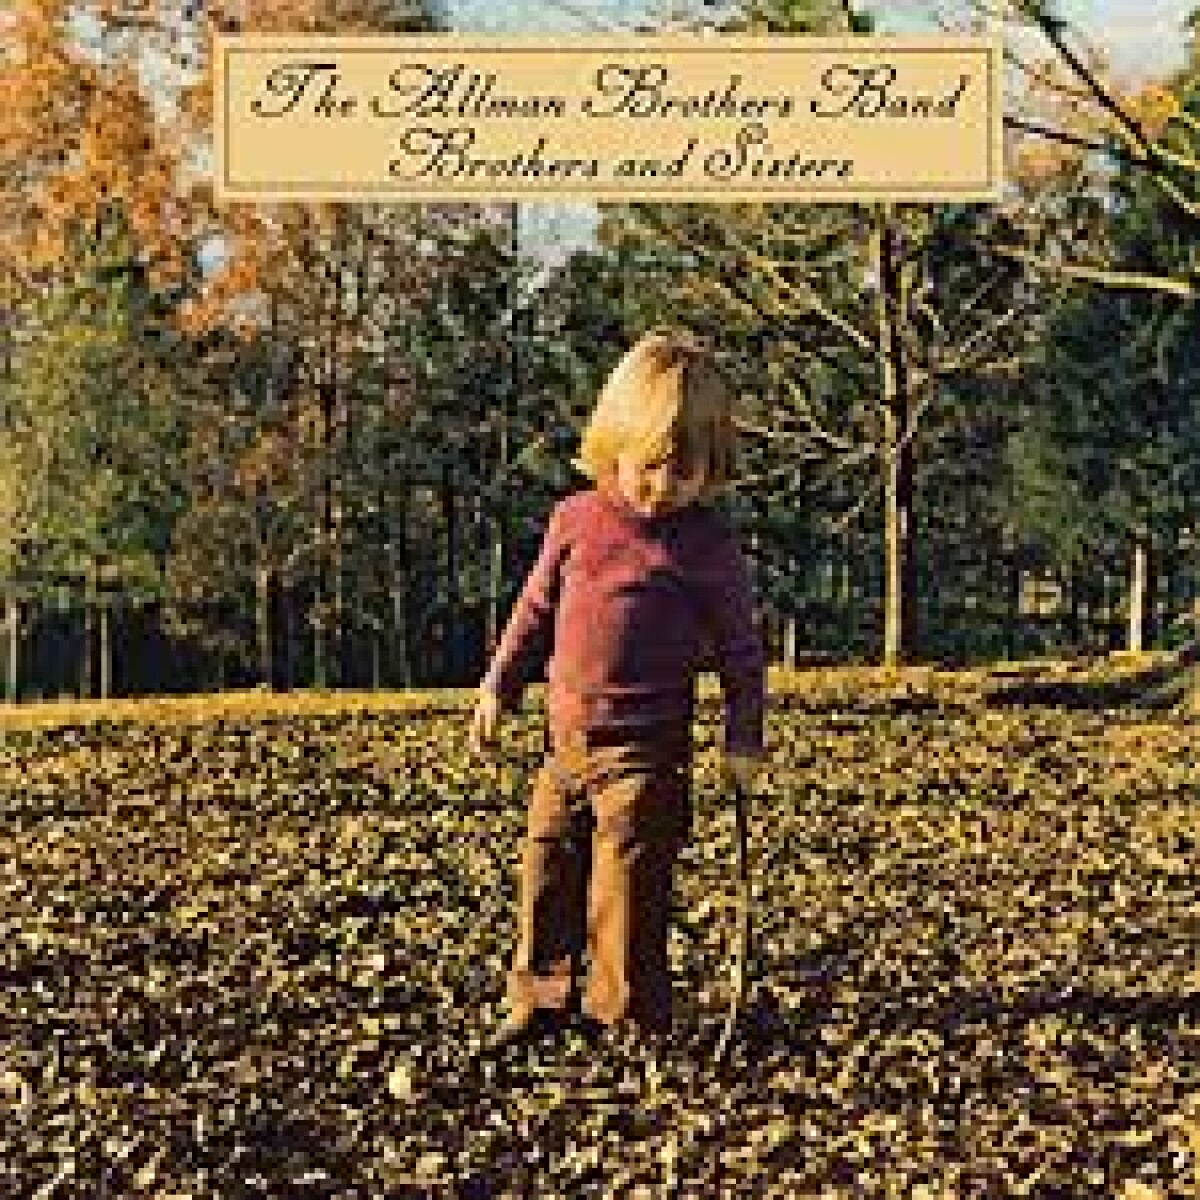 (l) Allman Brothers-brothers & Sisters - Vinilo 